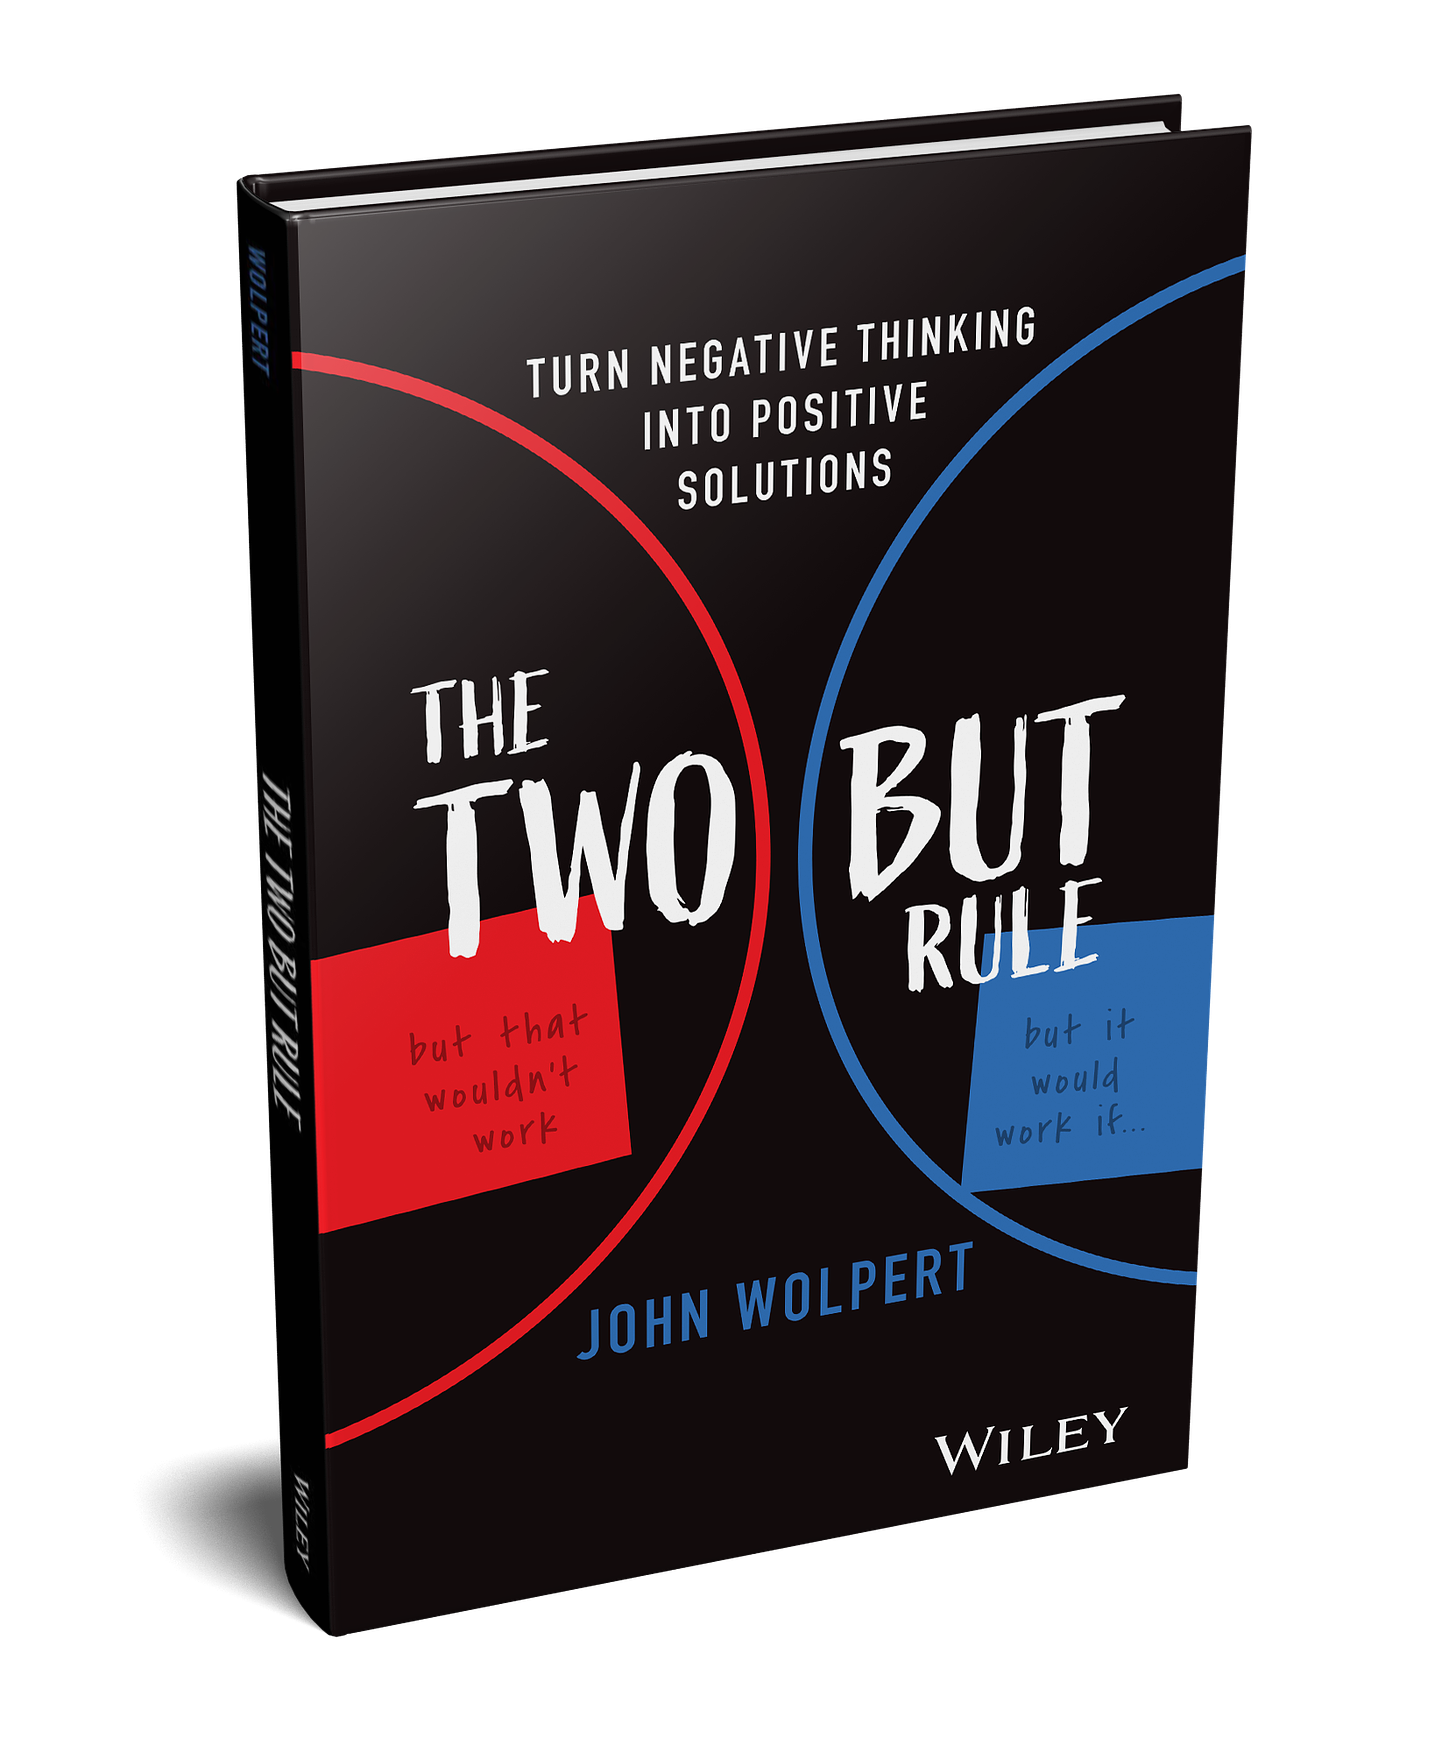 A 3D rendering of 'The Two But Rule: Turn Negative Thinking Into Positive Solutions' book (Wiley). The cover has two arcs on left and right in red and blue respectively. The Author is John Wolpert. The background is black matte.